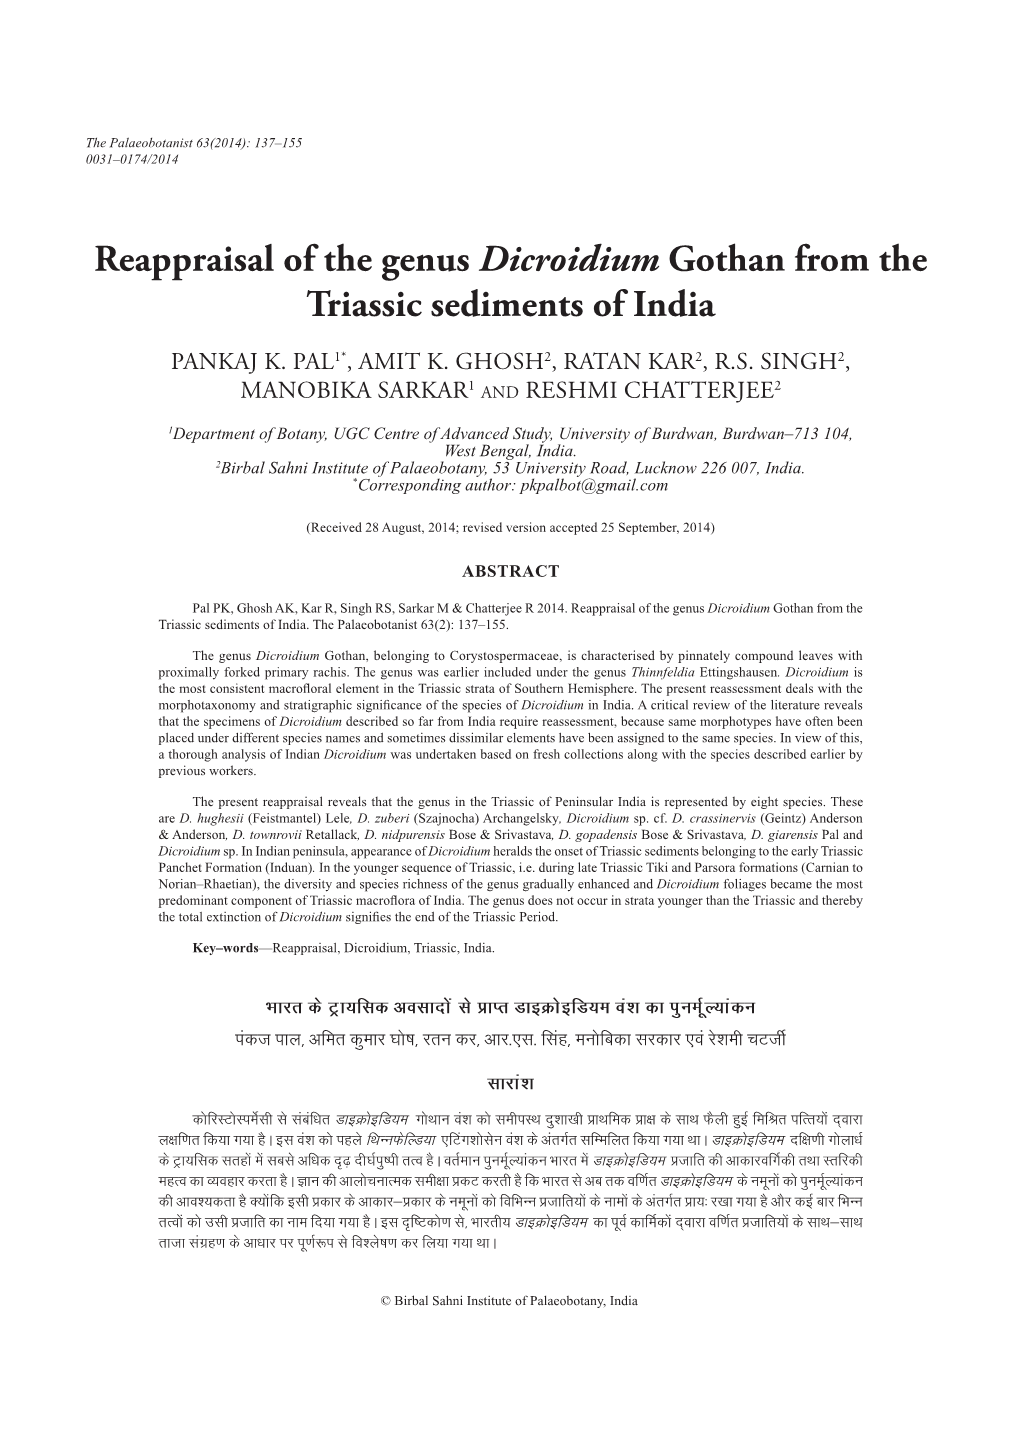 Reappraisal of the Genus Dicroidium Gothan from the Triassic Sediments of India